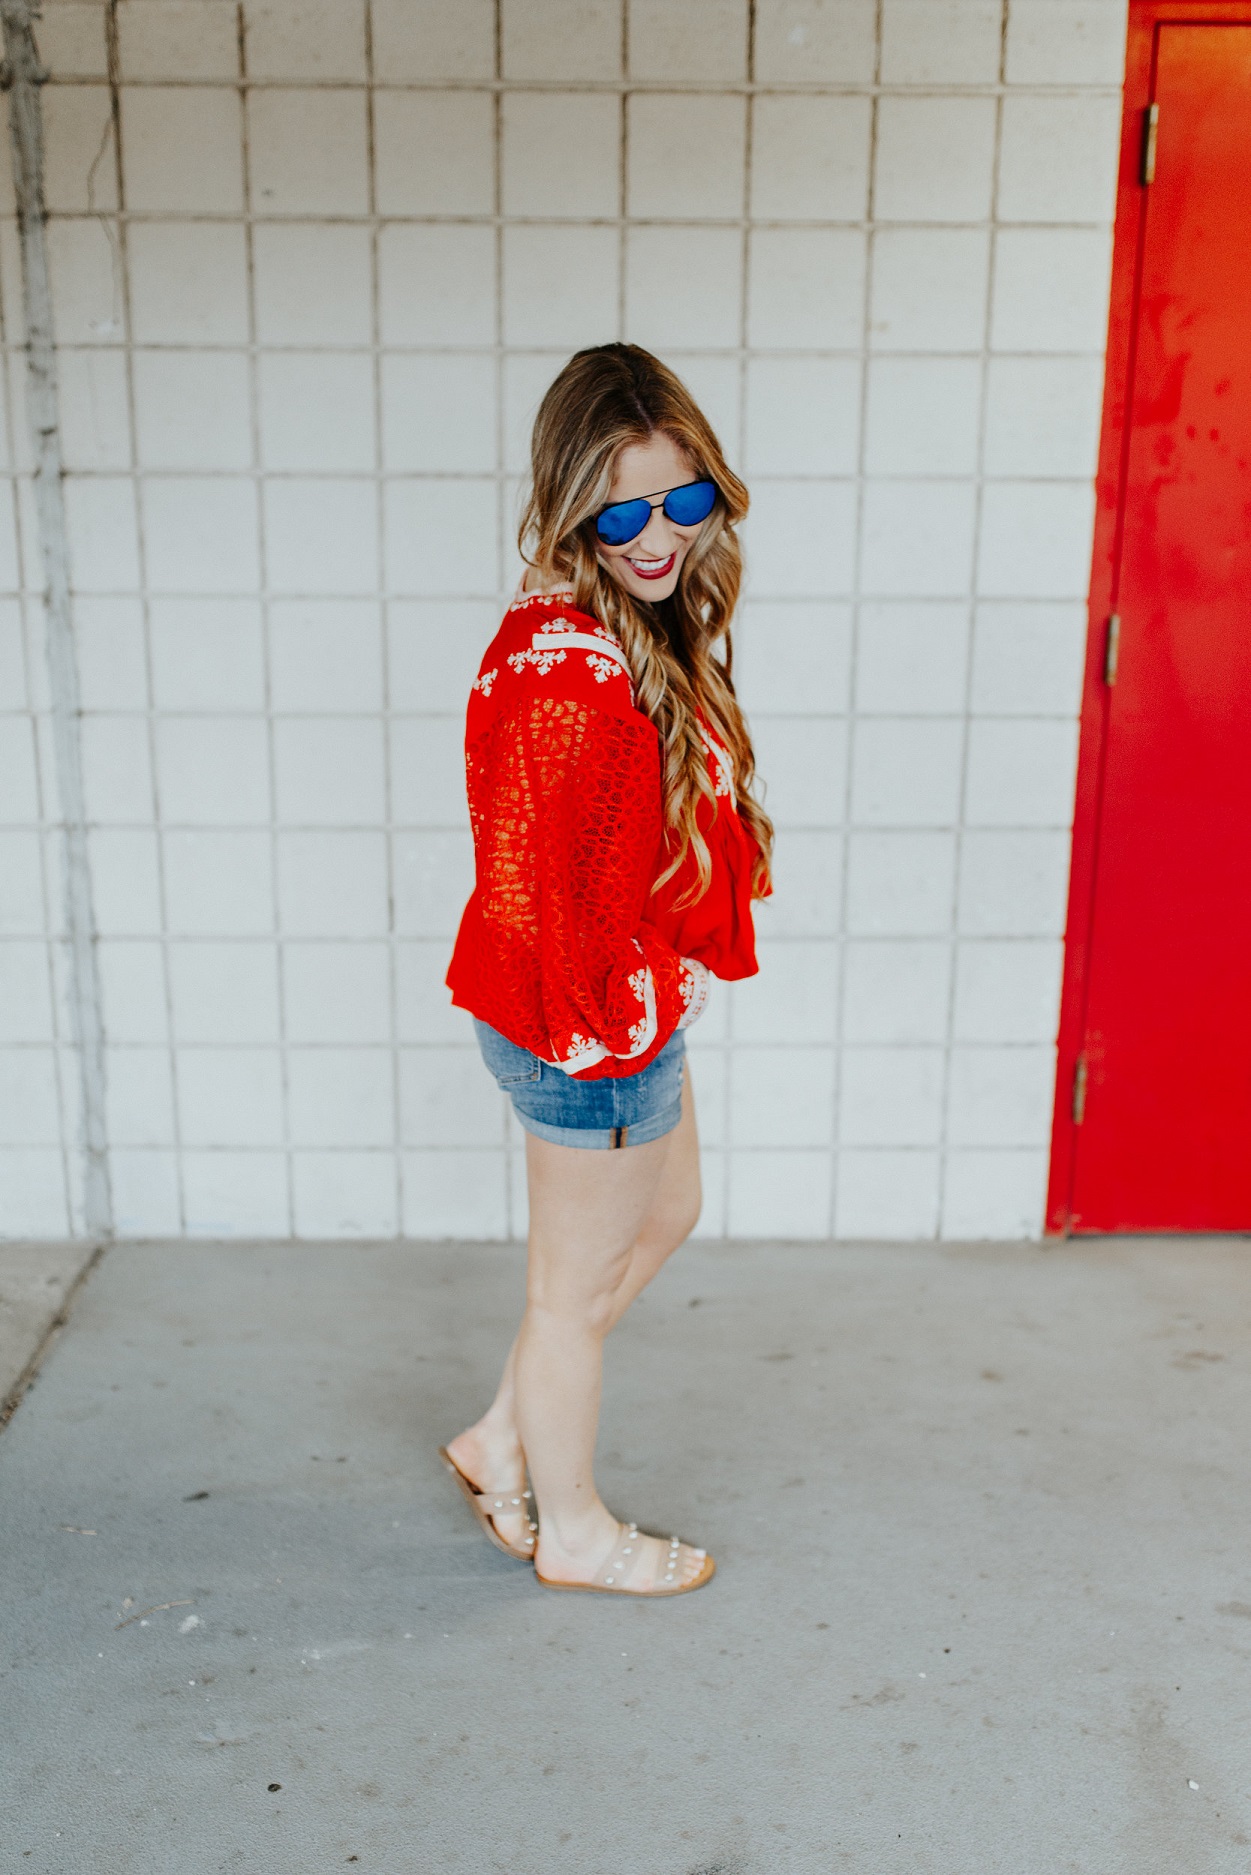 Favorite Spring color by popular fashion blogger Walking in Memphis in High Heels